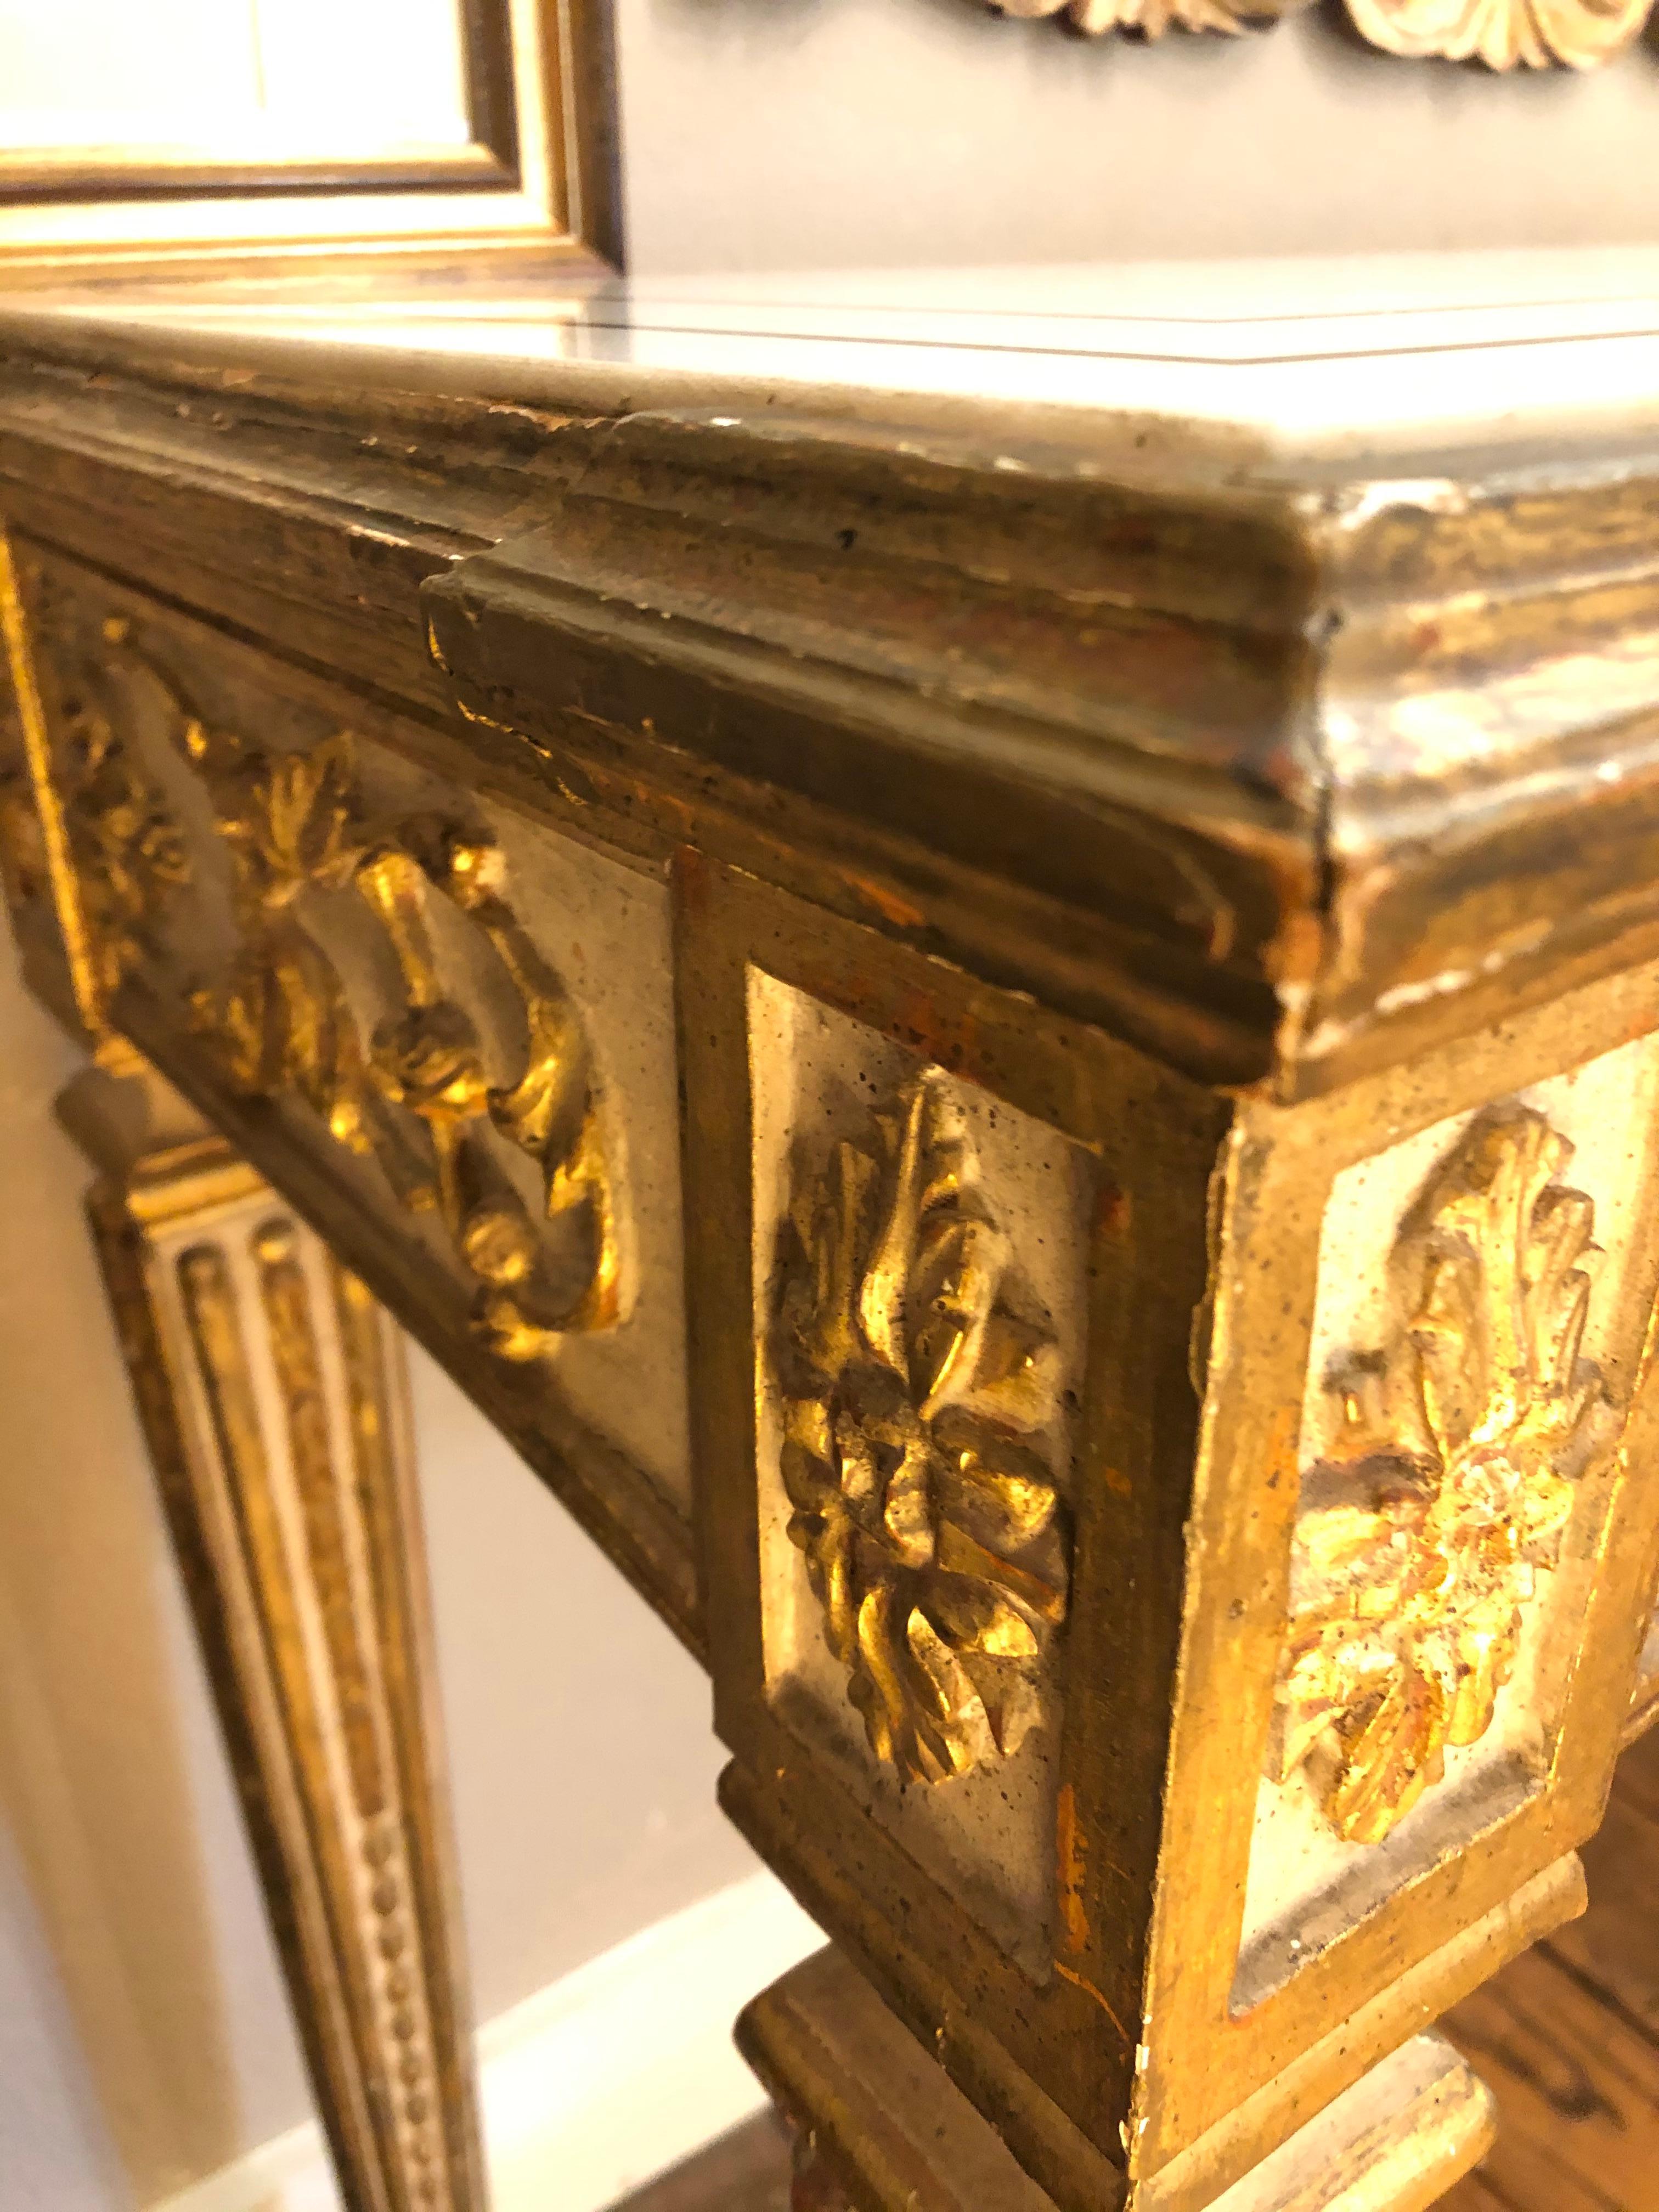 A spectacular 19th century antique Italian console having carved wood painted and gilded base in a wonderful cream and gold, with a piece de resistance white marble top with dark inlay border and central bow decoration. A show stopper in any room or